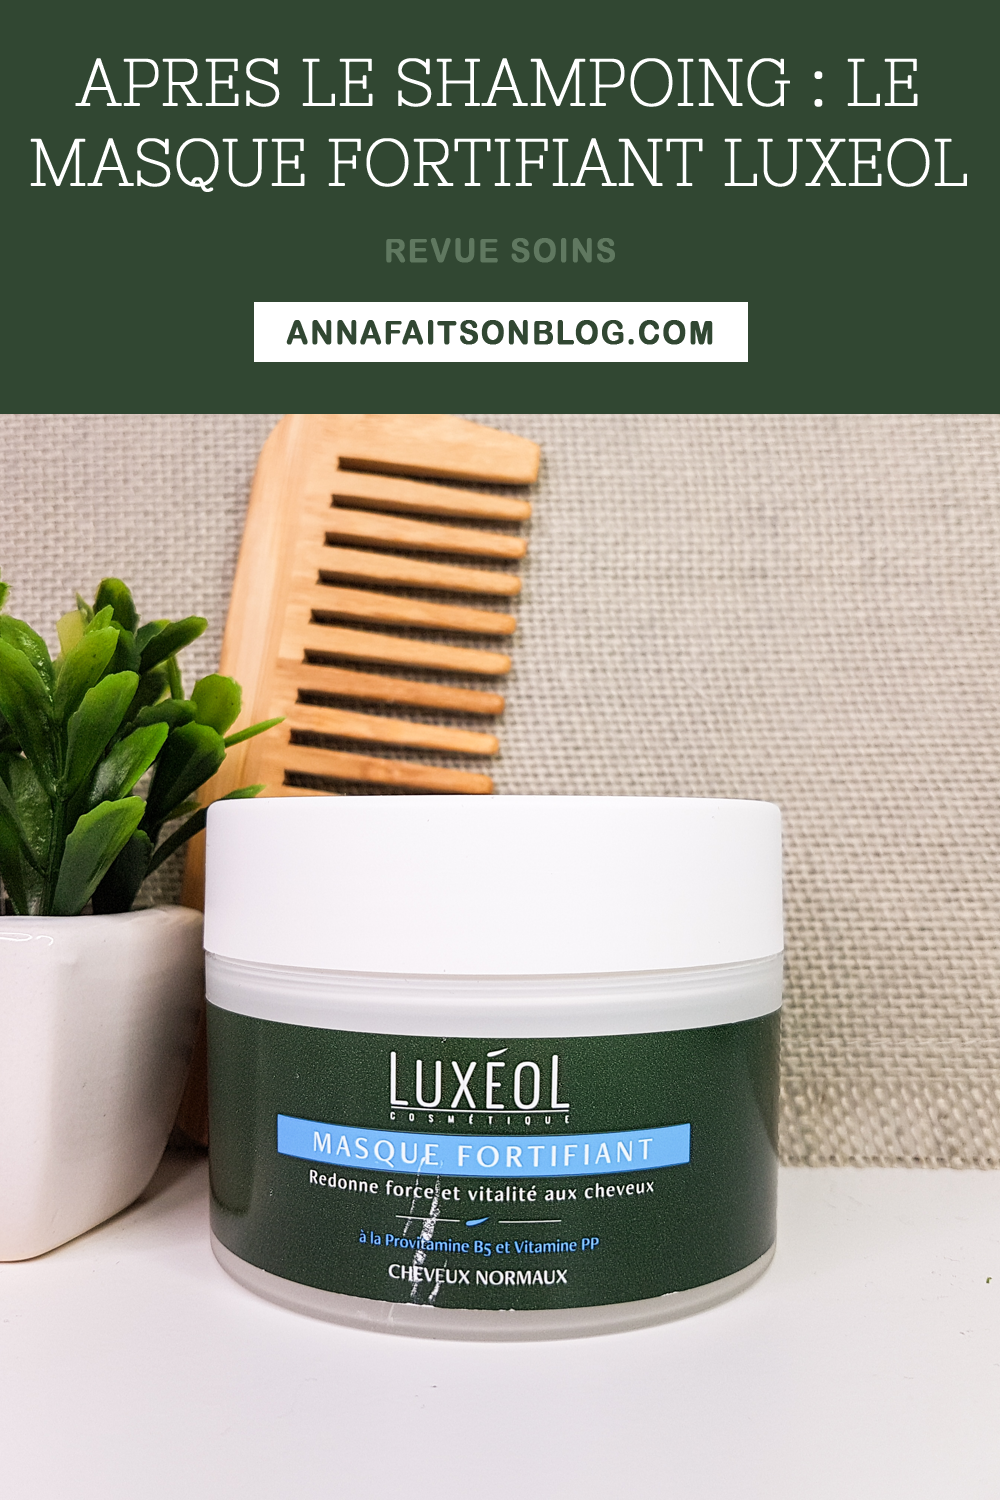 Masque fortifiant Luxeol